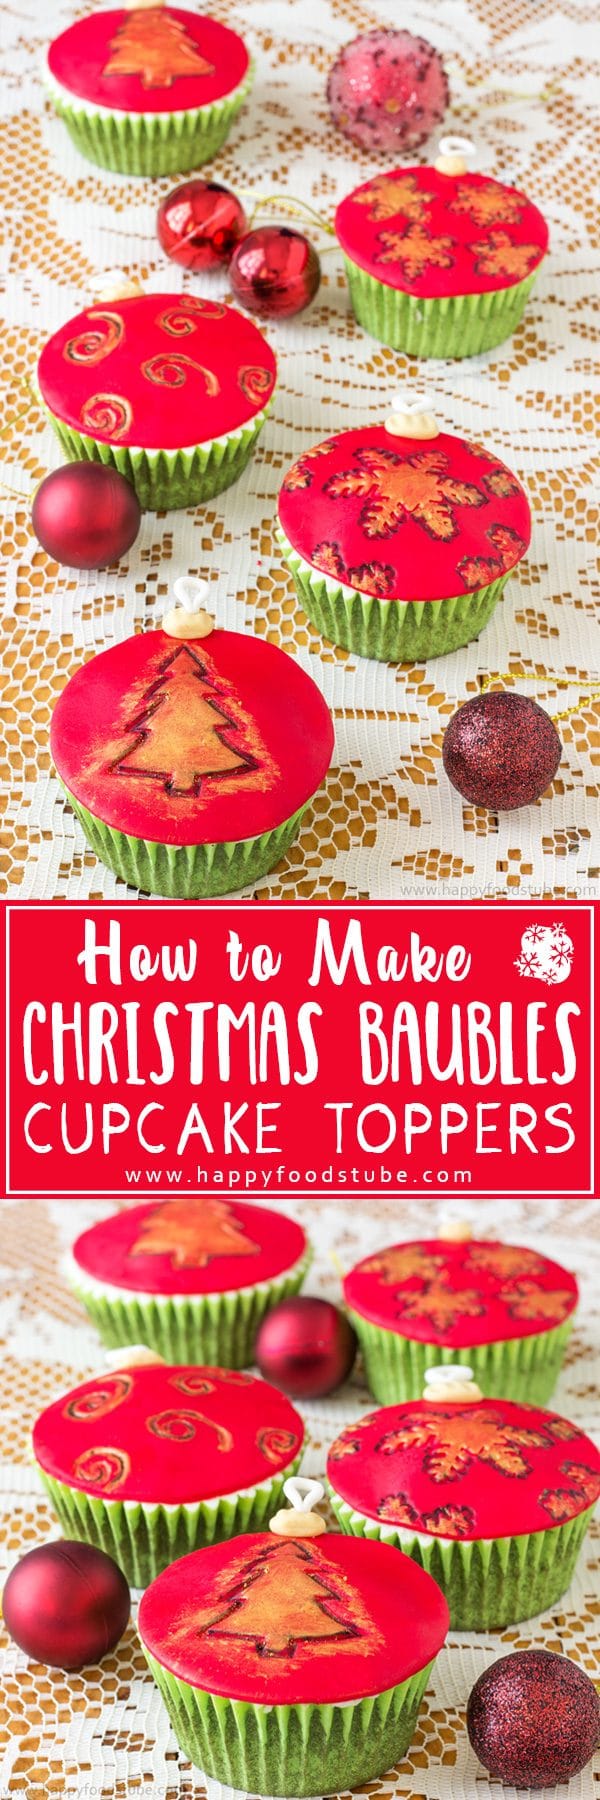 Edible Christmas gift idea, check out these Christmas Baubles Cupcake Toppers! This easy step by step video tutorial will show you how to make them! | happyfoodstube.com